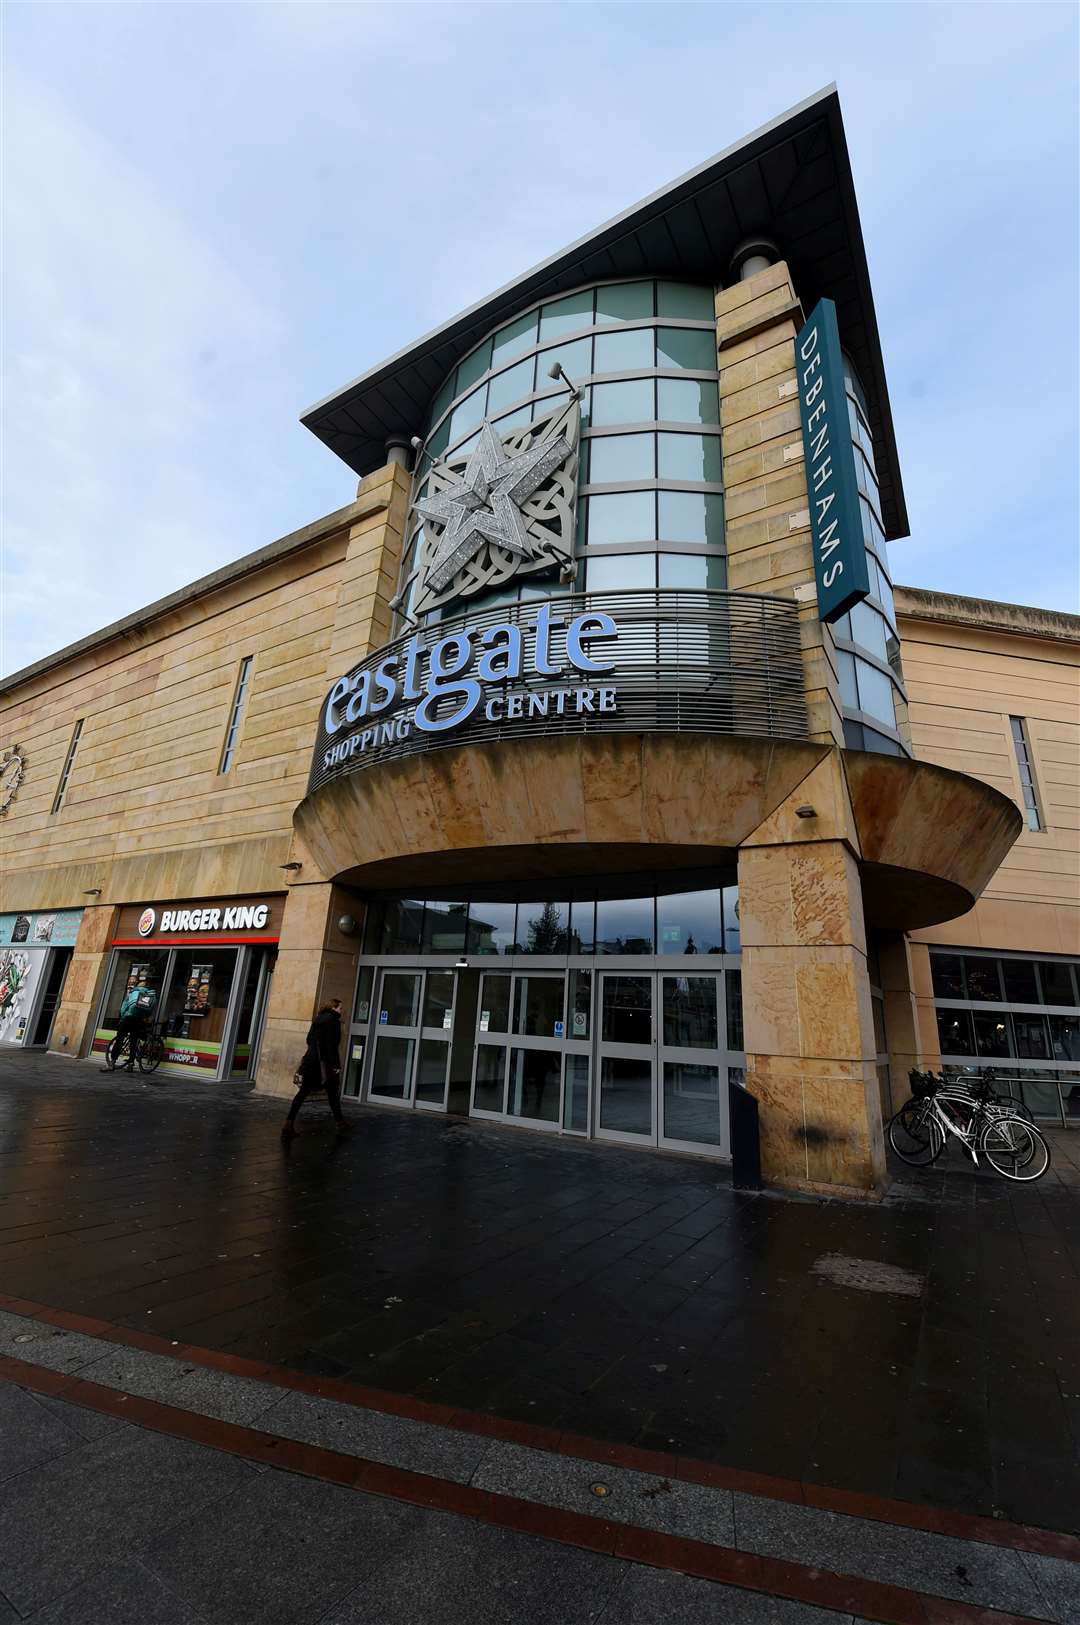 With its anchor store Debenhams set to shut, Eastgate Shopping Centre in Inverness now looks set to see the neighbouring Topshop and Topman unit close as well.